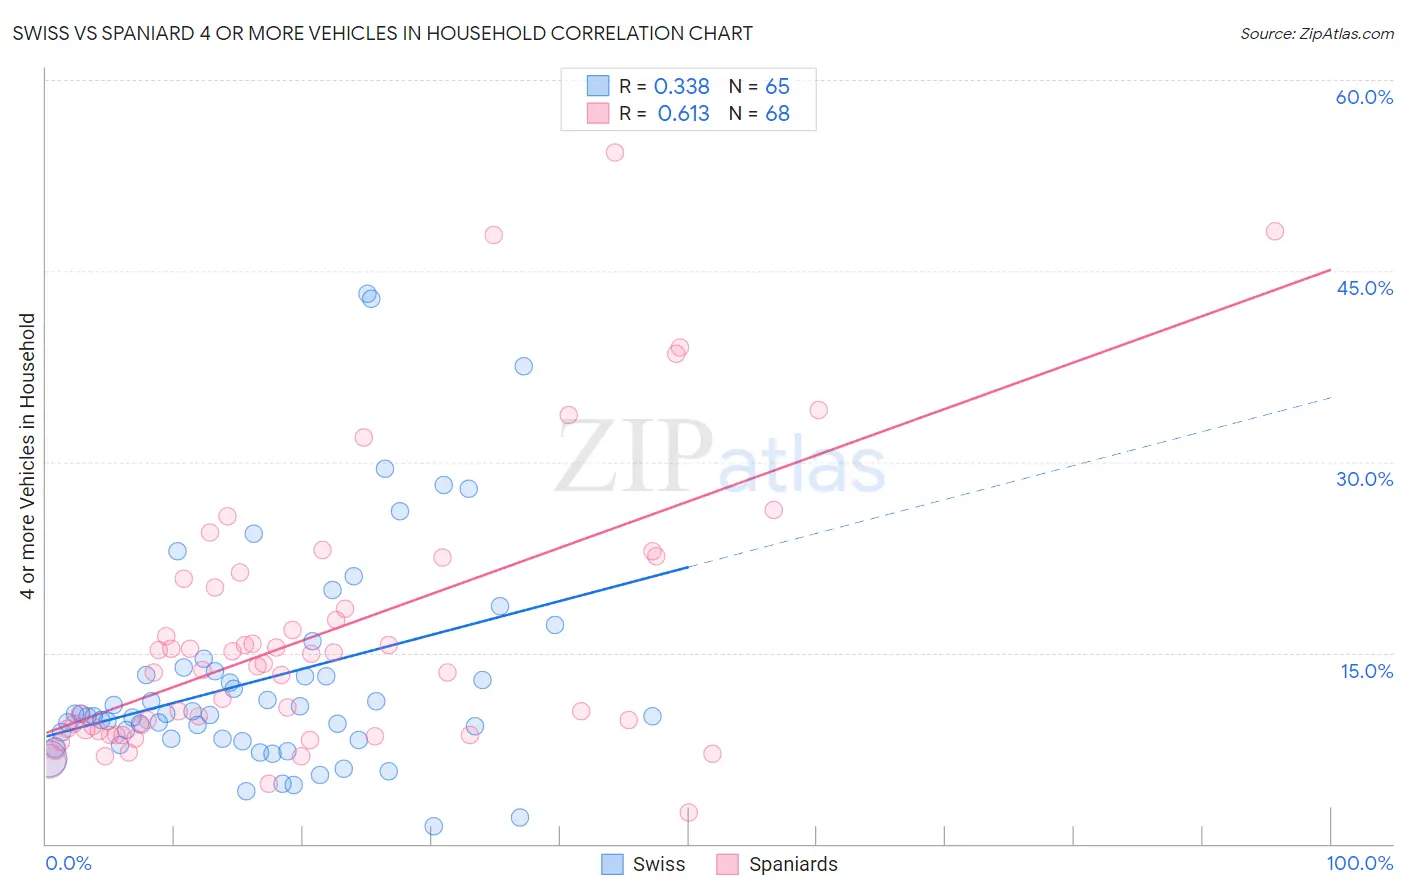 Swiss vs Spaniard 4 or more Vehicles in Household